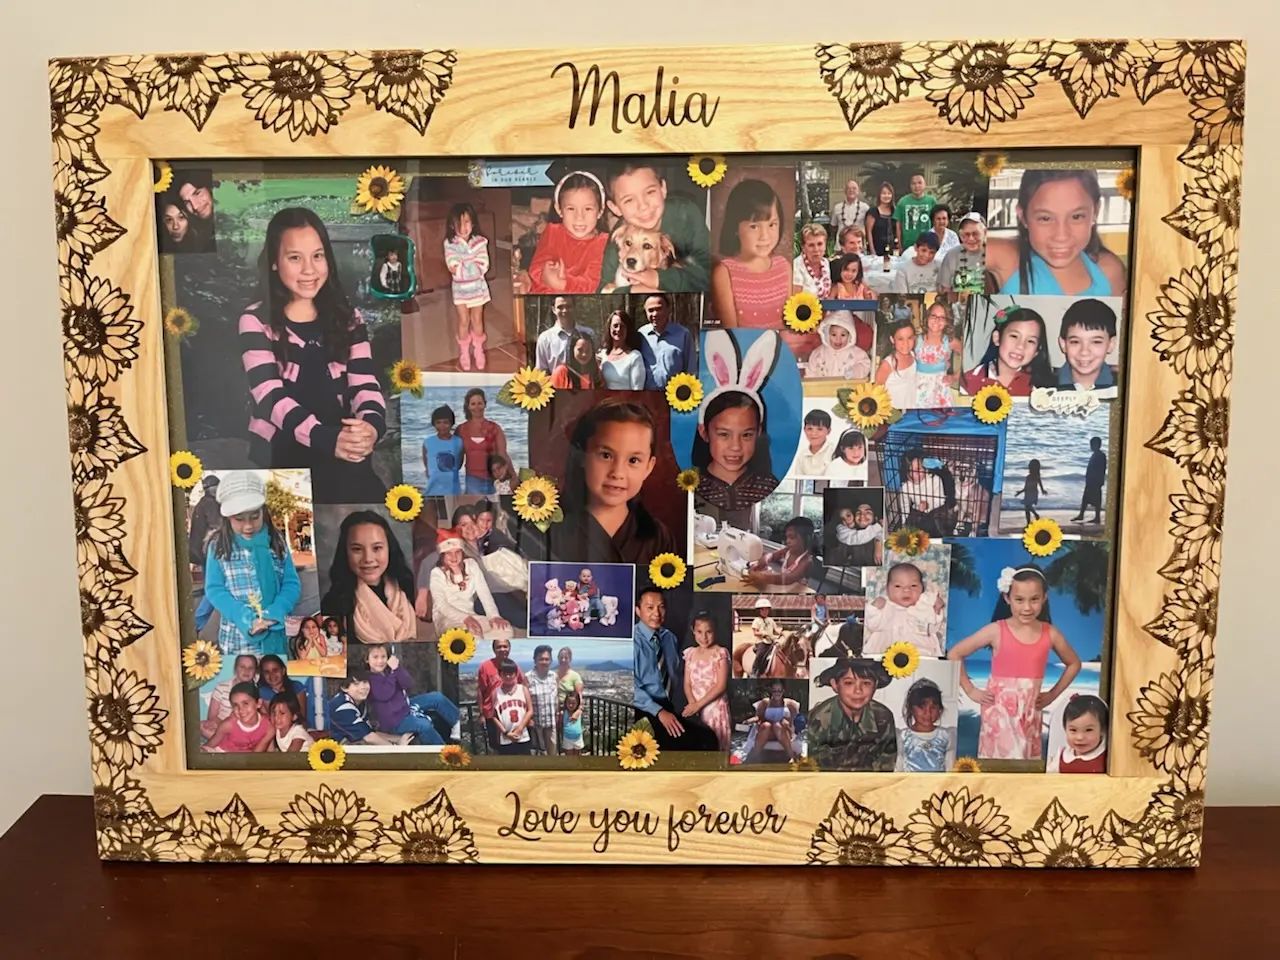 A little over a year ago, my cousin Malia unexpectedly passed away. This photo collage was at her service and my Aunt asked if I could make a frame for it.

I had to make sure it was special, detailed, and one of a kind, just like Malia was. 

I used some ash, some creative design work and the laser to engrave the entire frame with sunflowers. You can't tell from the picture, but there is quite a bit of depth to each flower and the text so you can feel them when you run your hand over them. 

I gave the frame to my Aunt on Easter Sunday and we were able to share a very special moment. 

I hope you like it Malia, we miss you  very much!